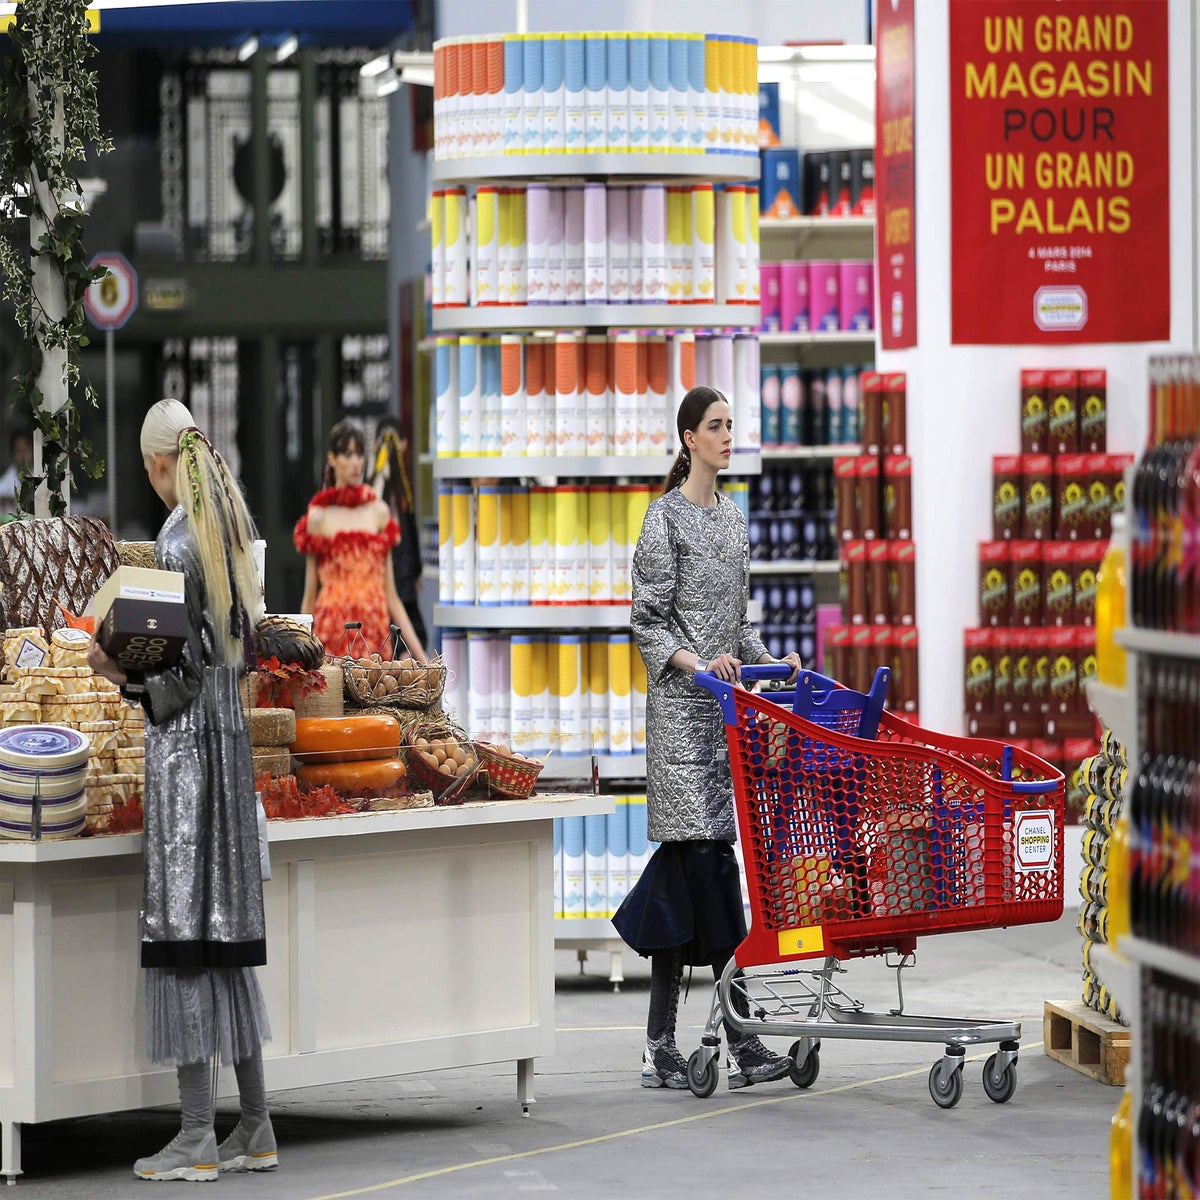 The Grocery Store, Reimagined as a Chanel Runway - Bloomberg